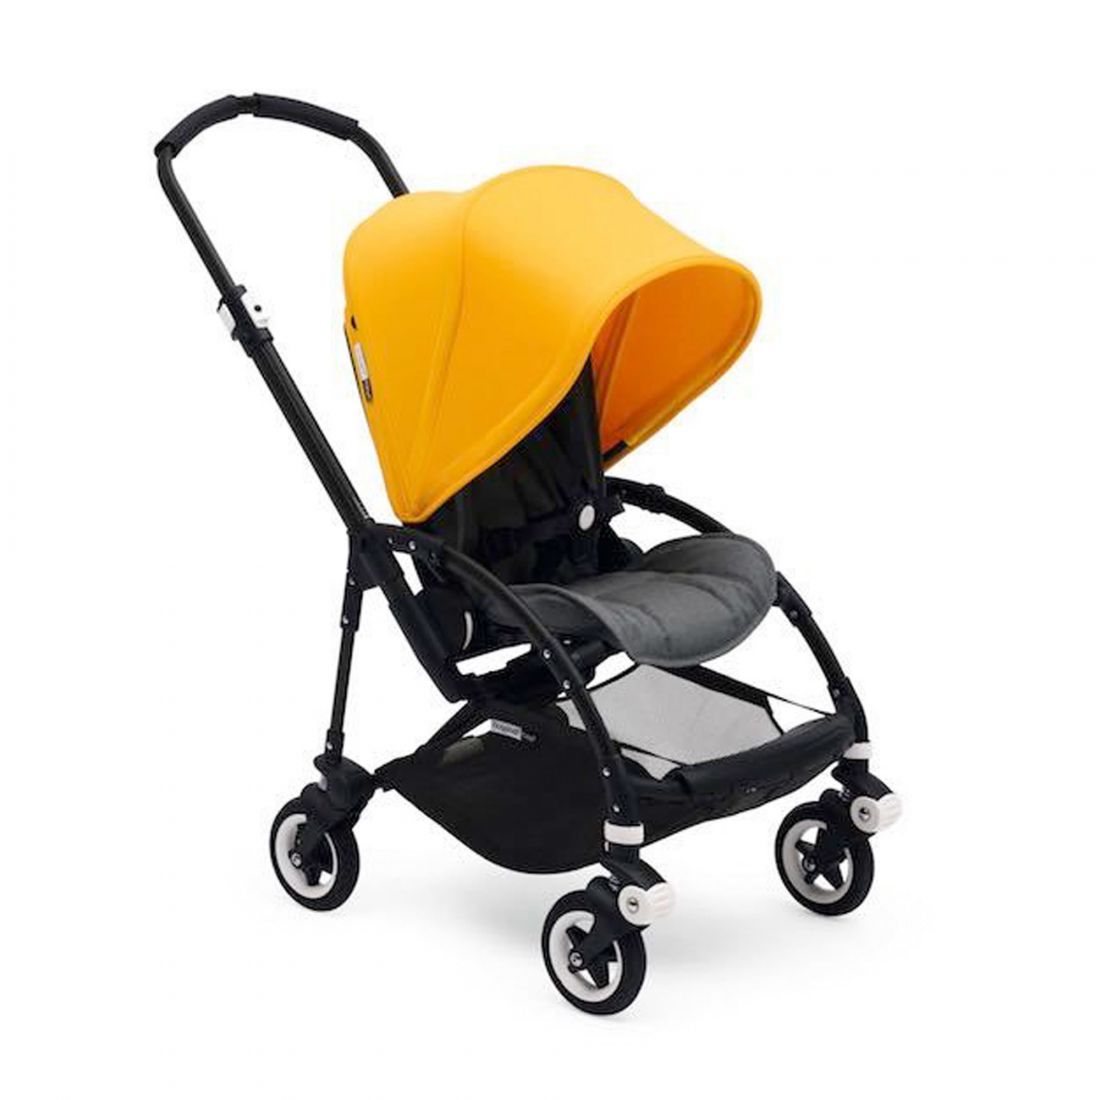 Bugaboo Kids Bee 5 Black Chassis/Grey Melanze-Sunrise Yellow Complete Stroller